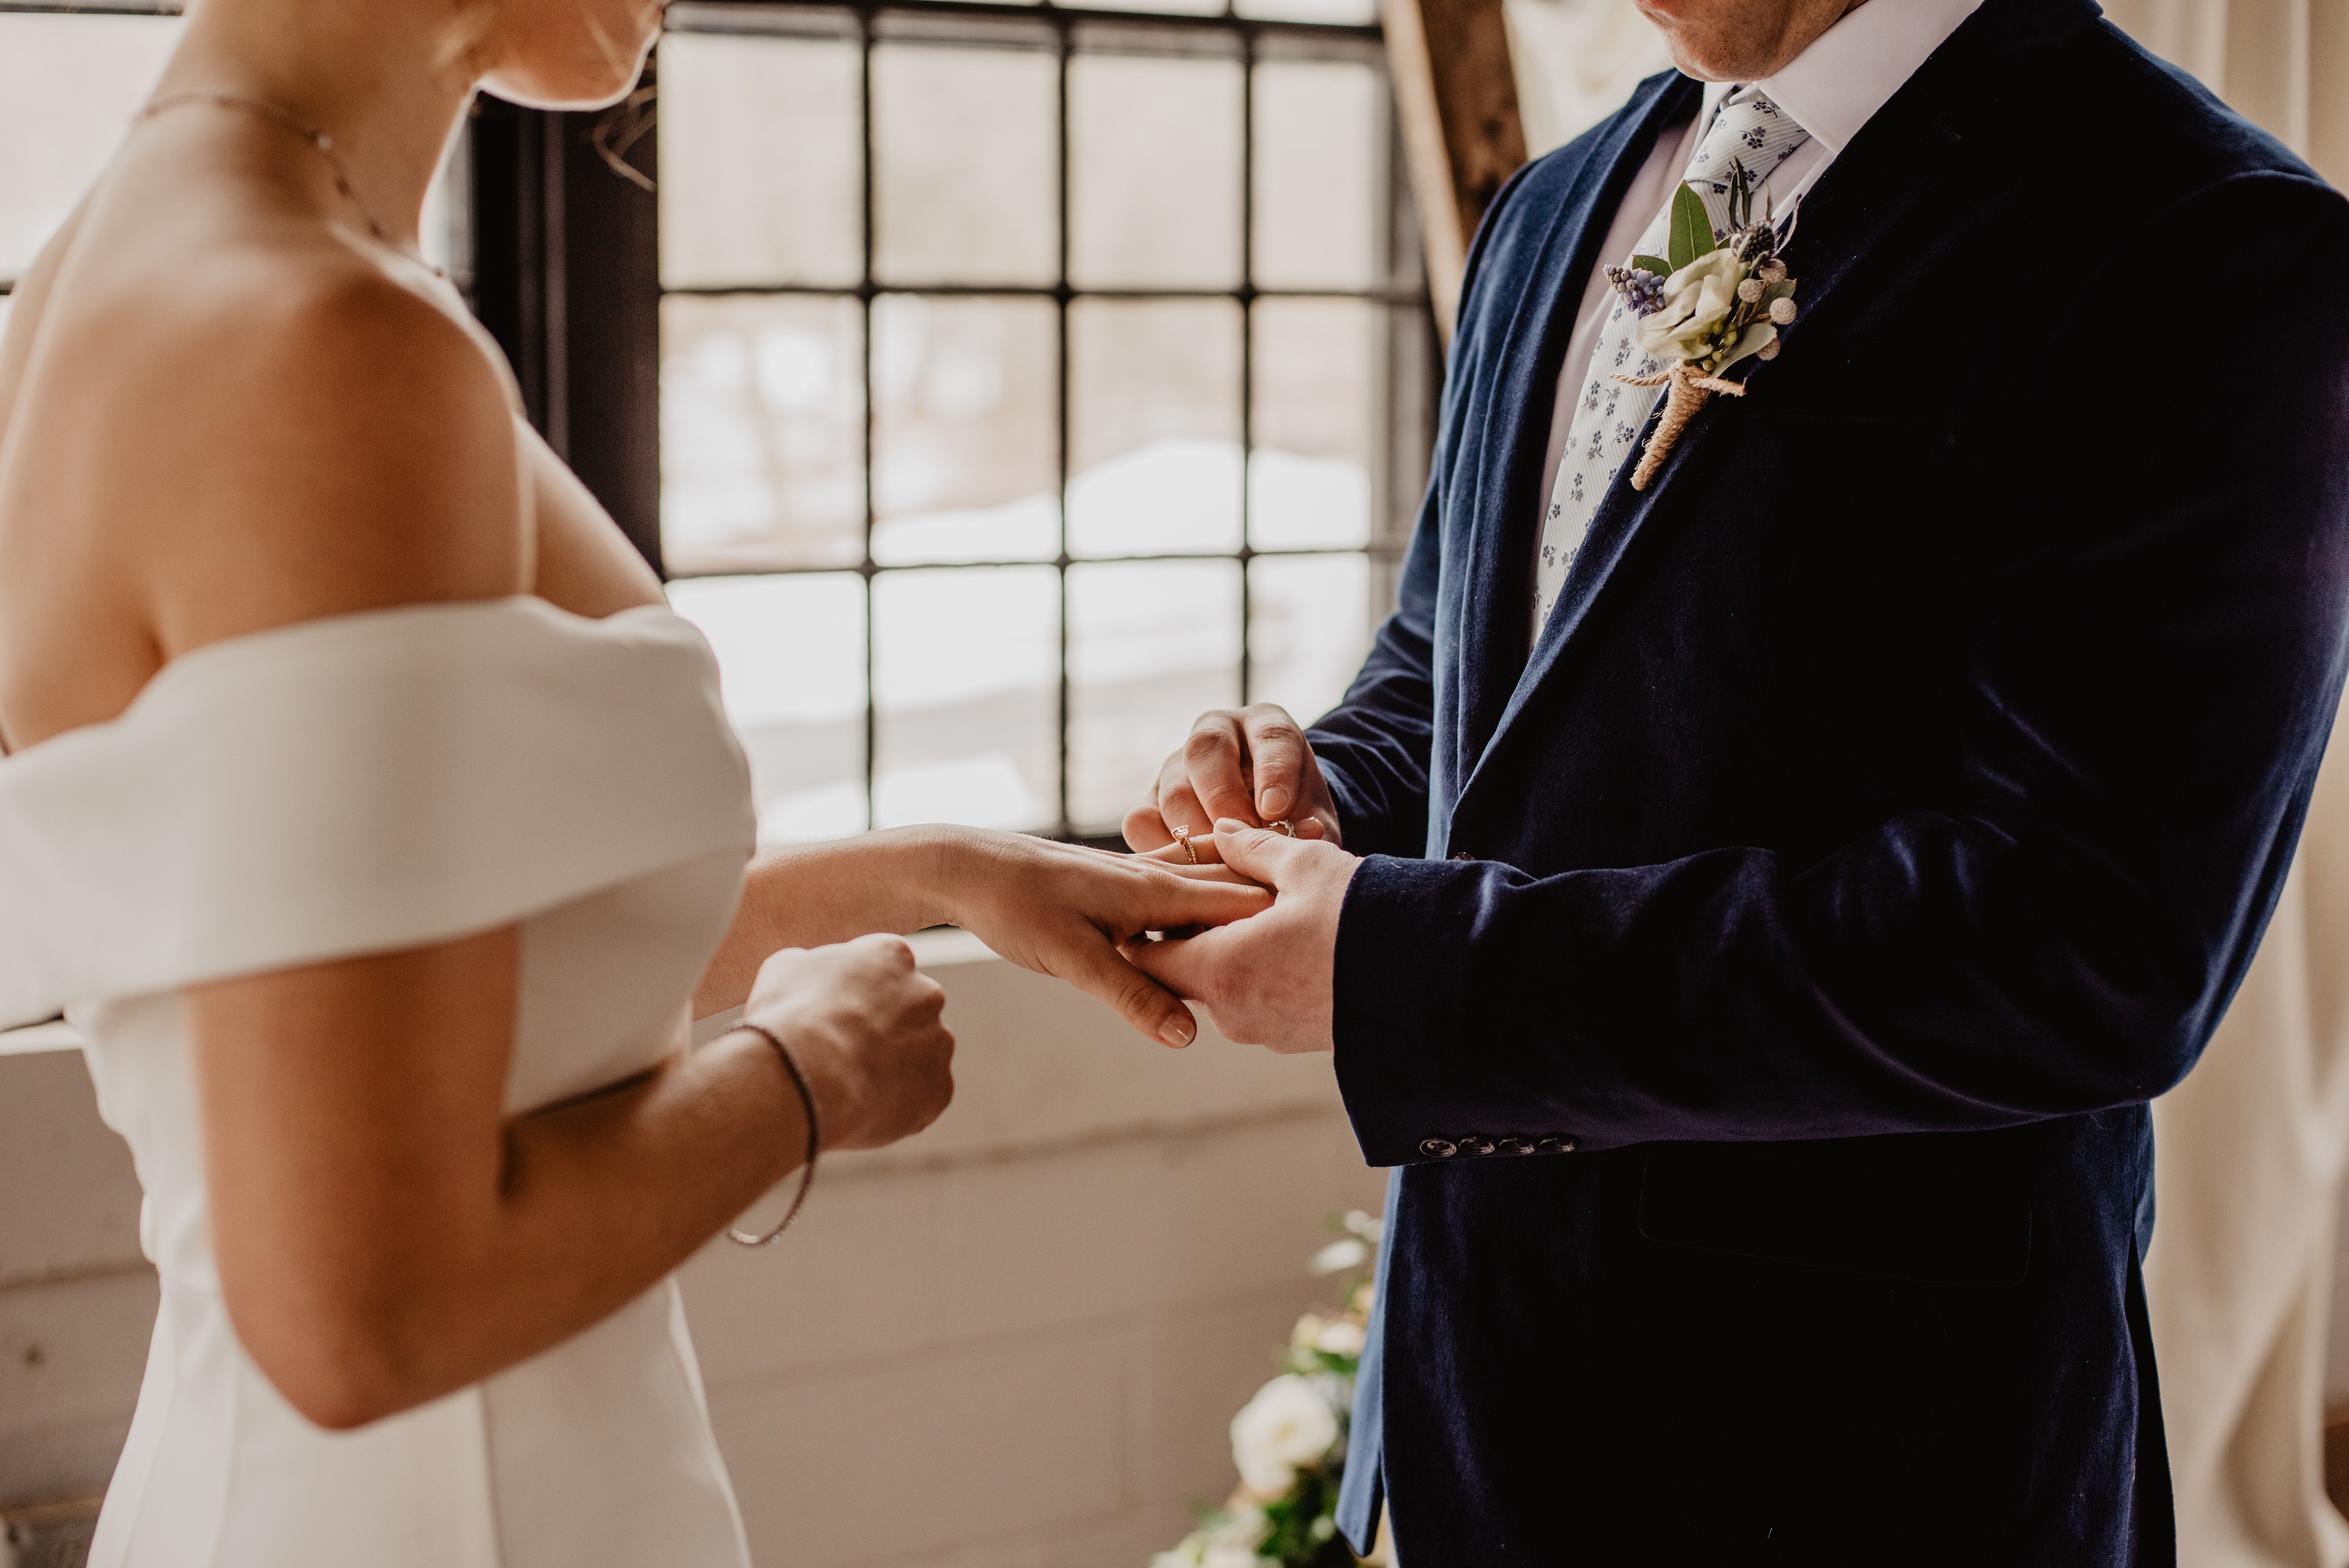 A couple on their wedding day. | Source: Pexels/Emma Bauso